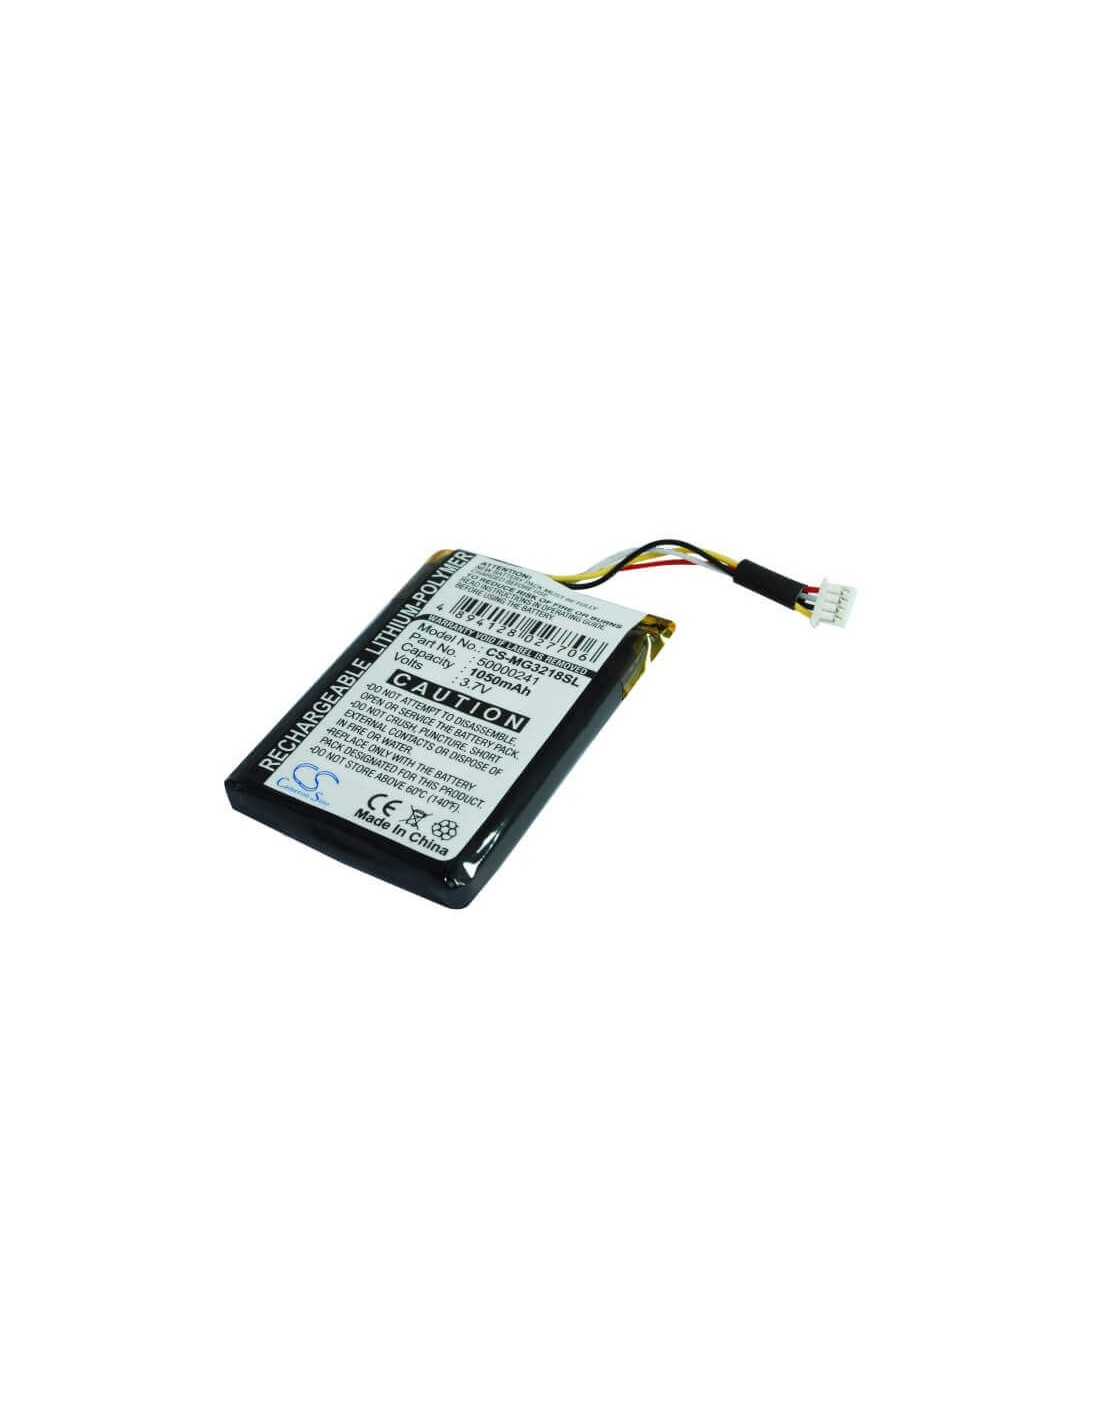 Battery for Typhoon Myguide M Imove 3218, Myguide Pnd 3218, 3.7V, 1050mAh - 3.89Wh